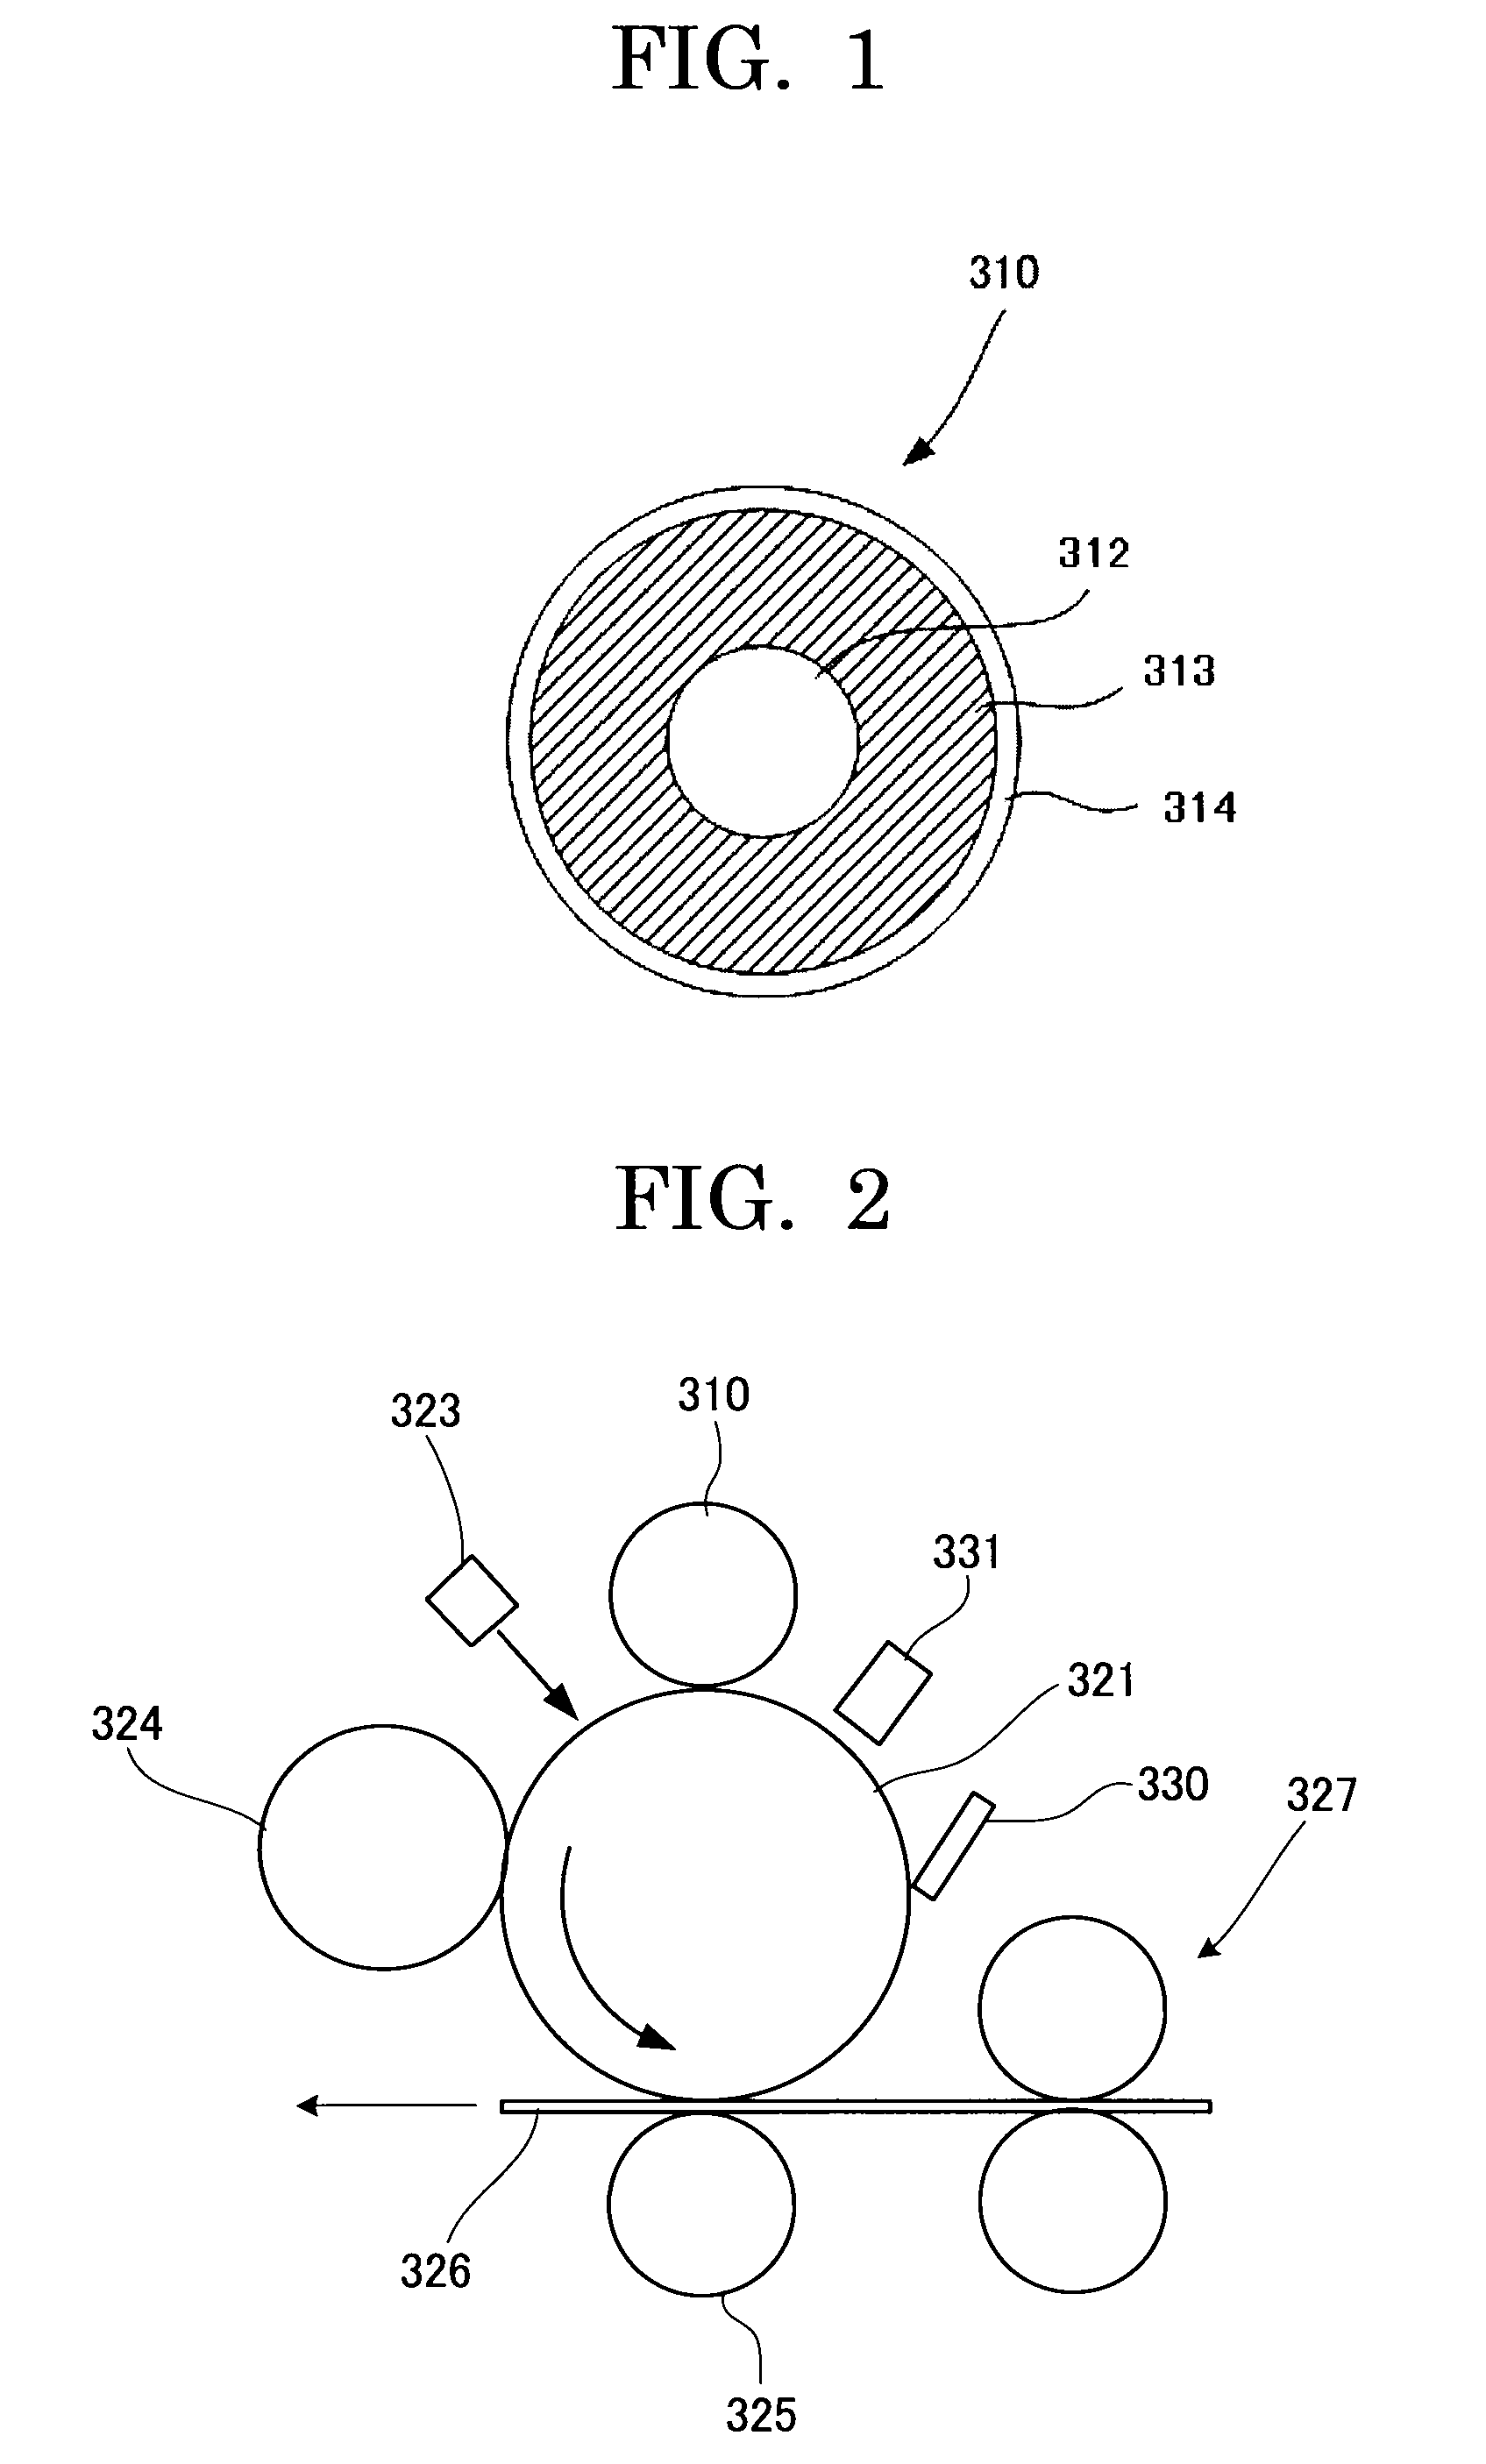 Toner, image forming apparatus, image forming method, and process cartridge using the toner